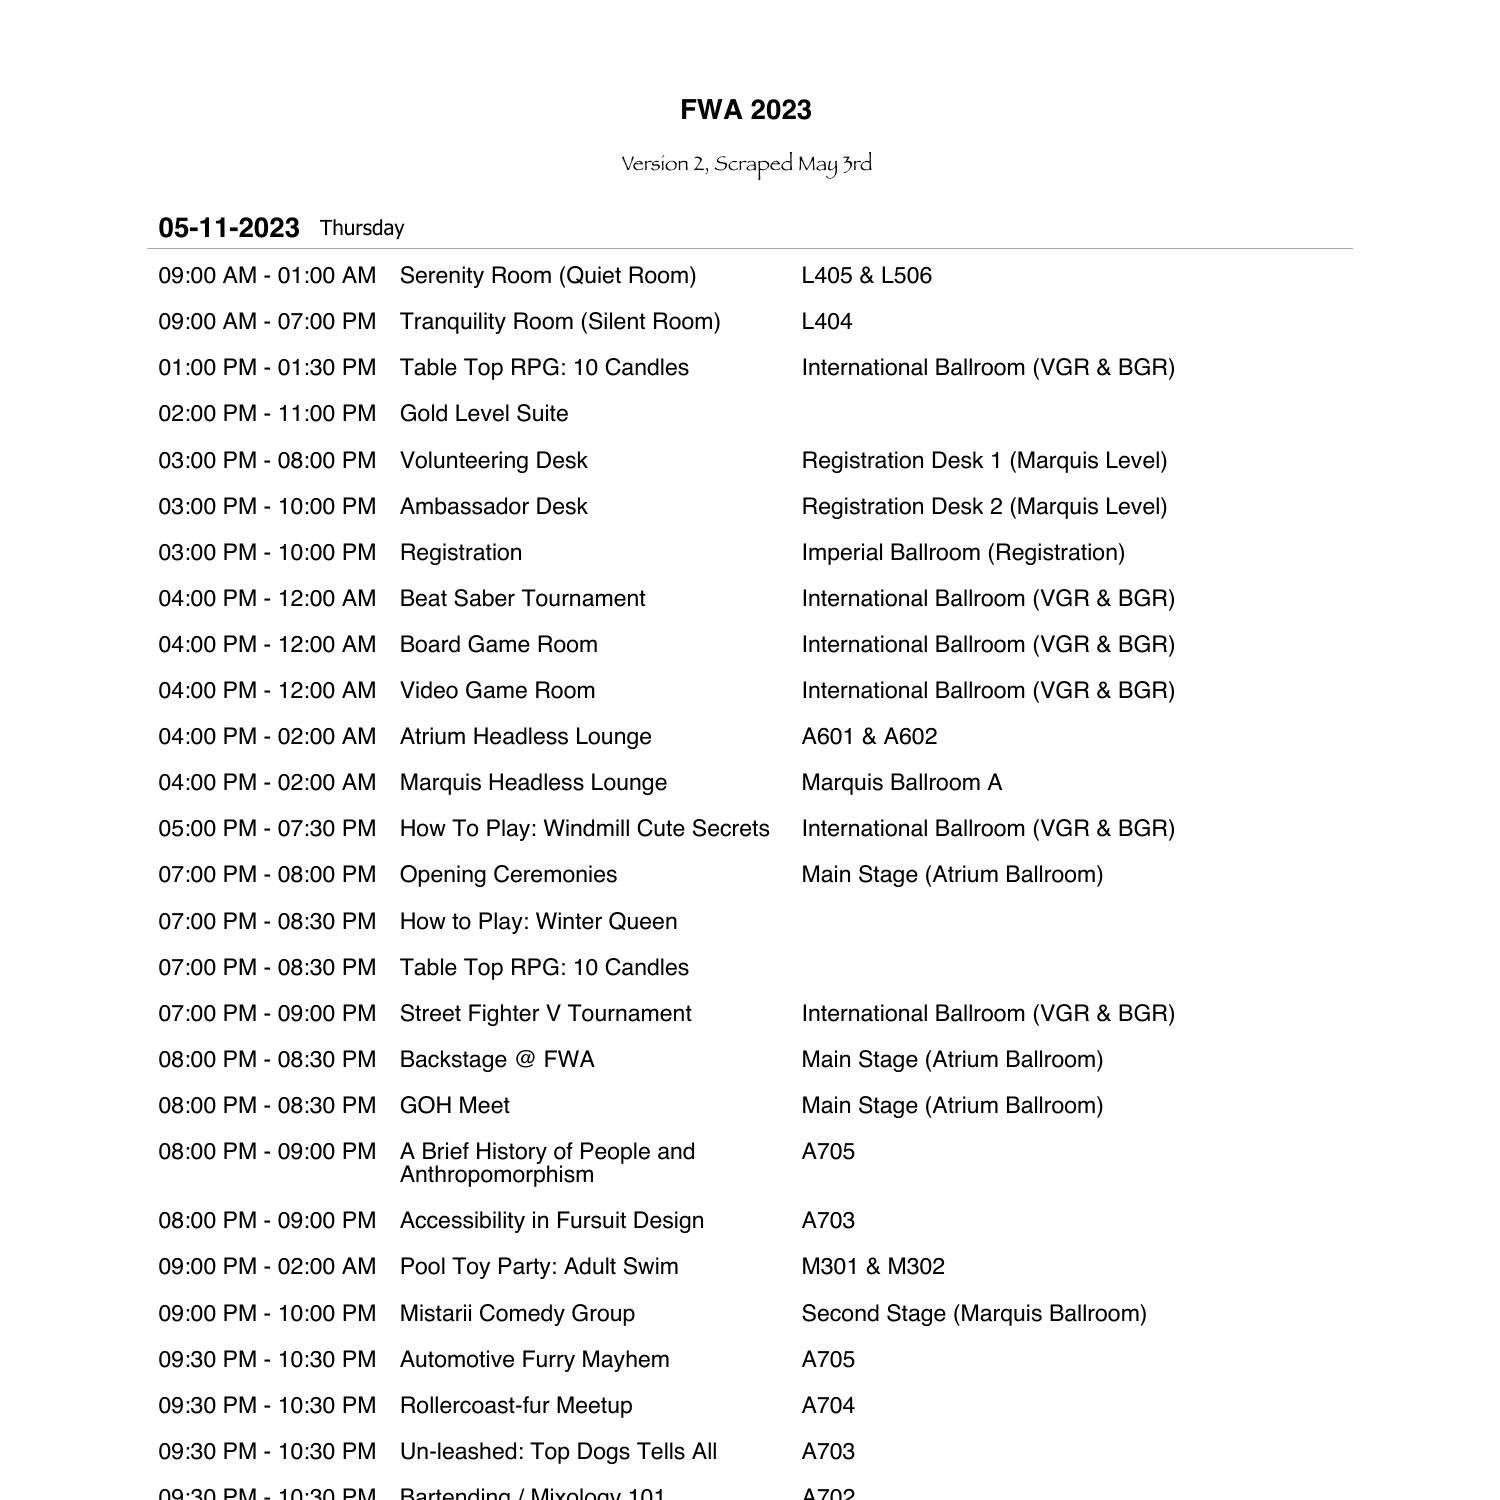 FWA 2023 Schedule Complete v2.pdf DocDroid